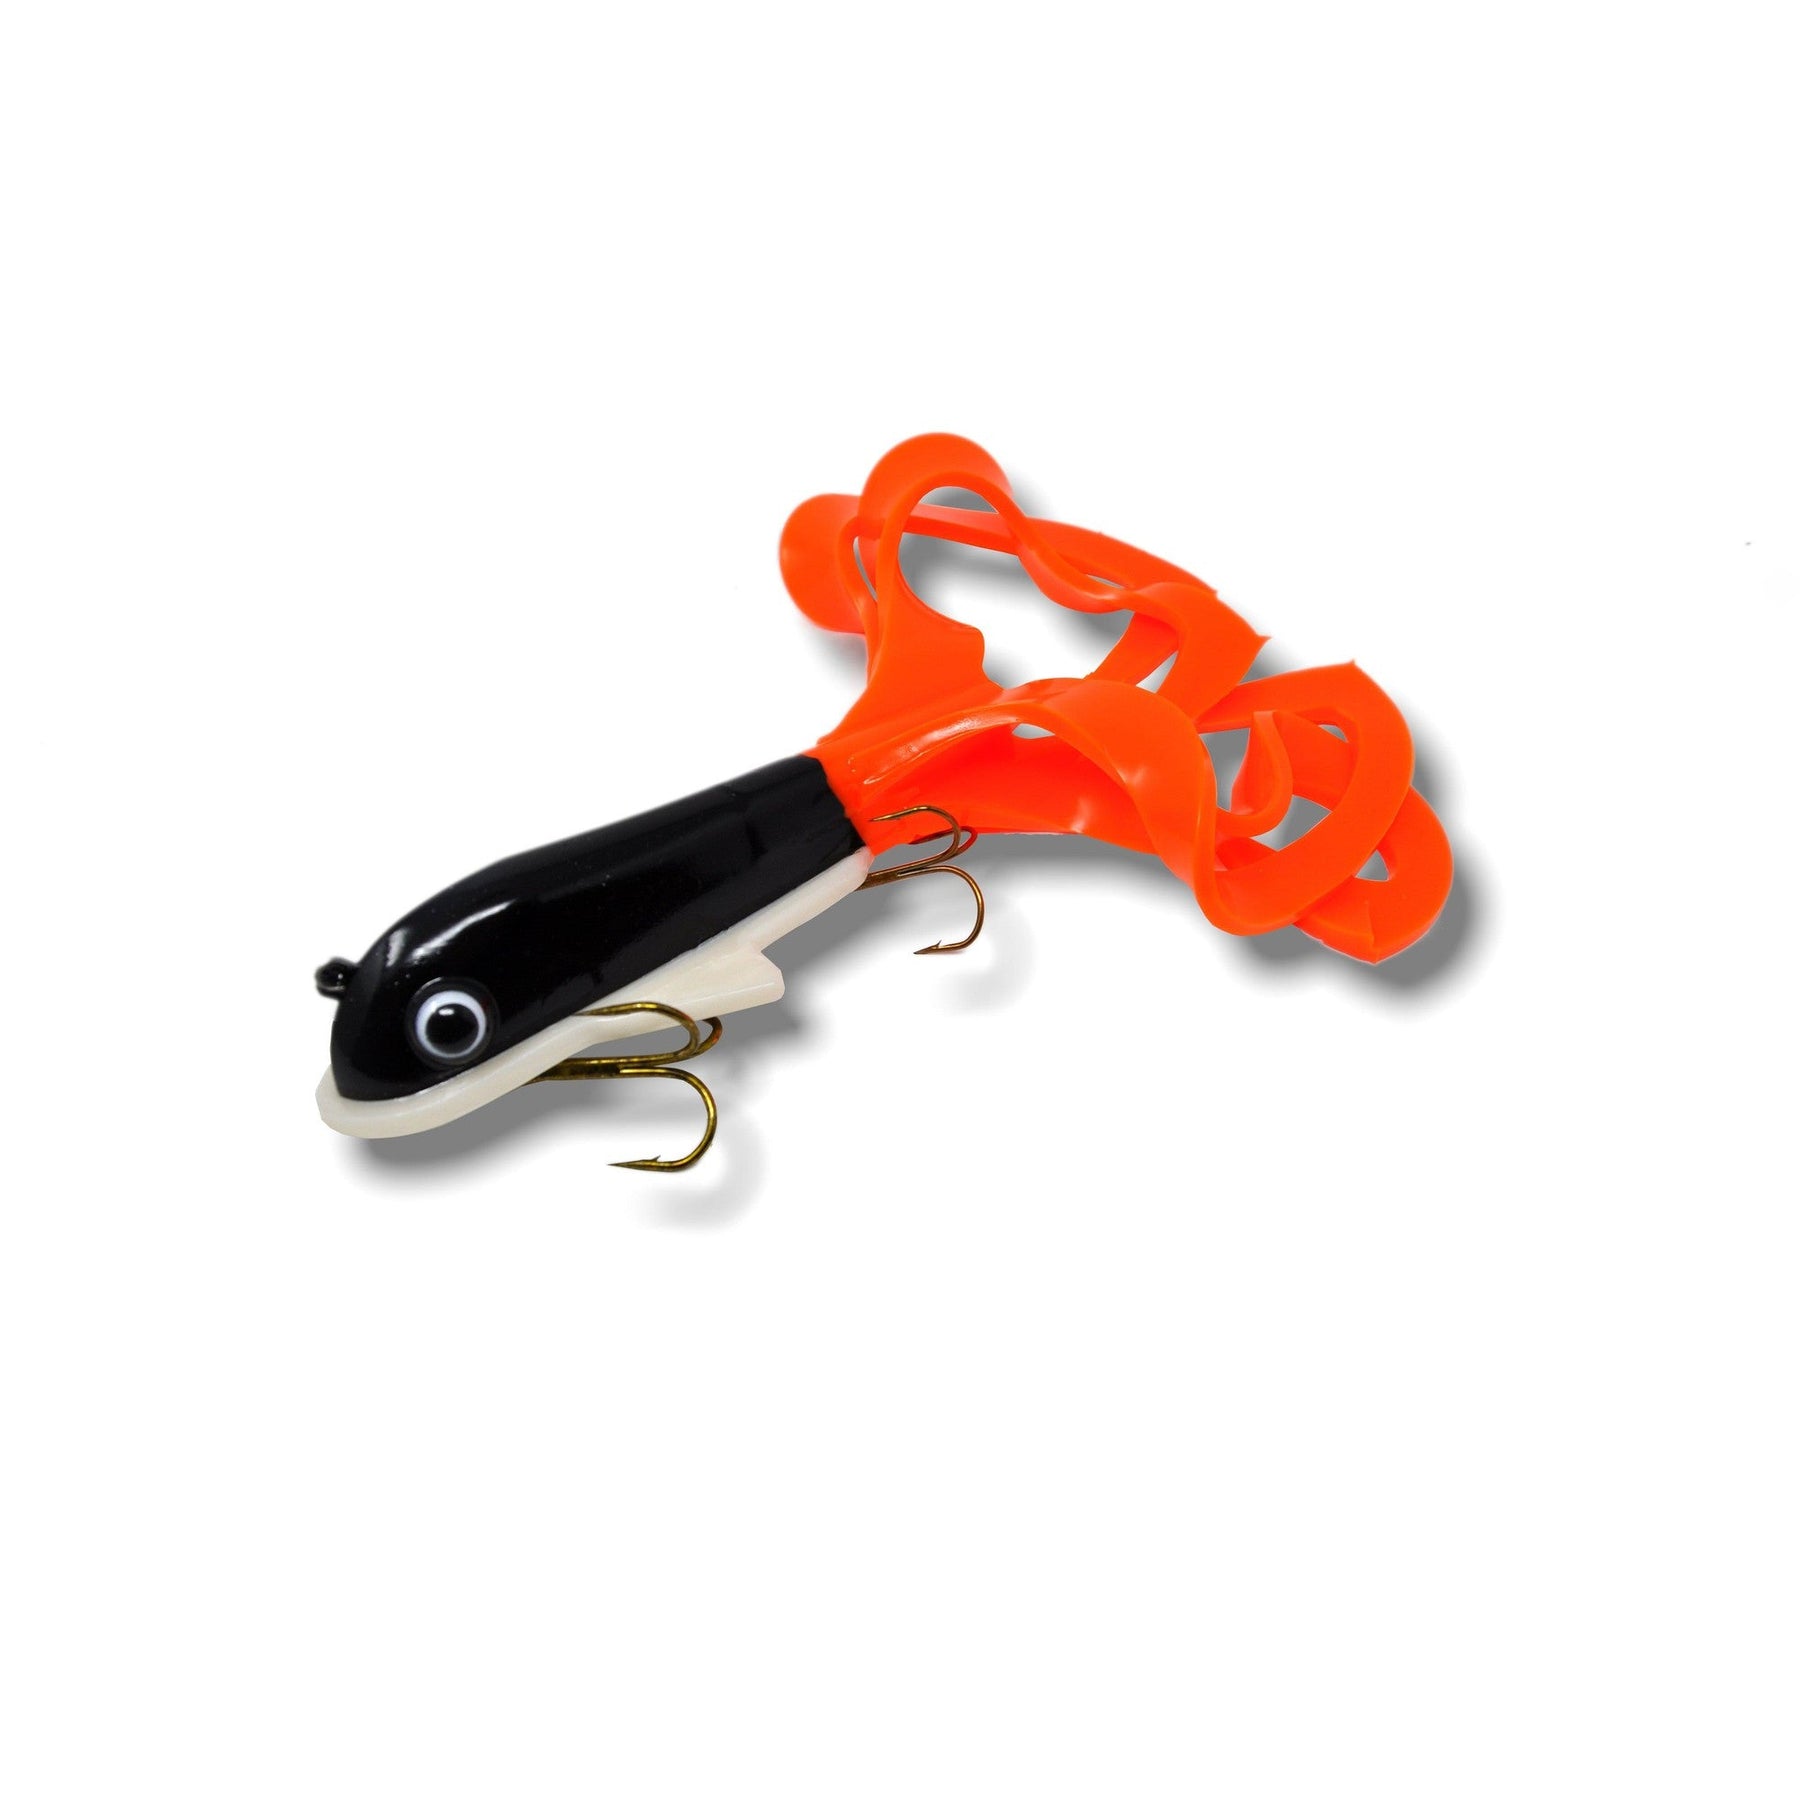 View of Rubber Musky innovation Quad Dawg BL Special available at EZOKO Pike and Musky Shop